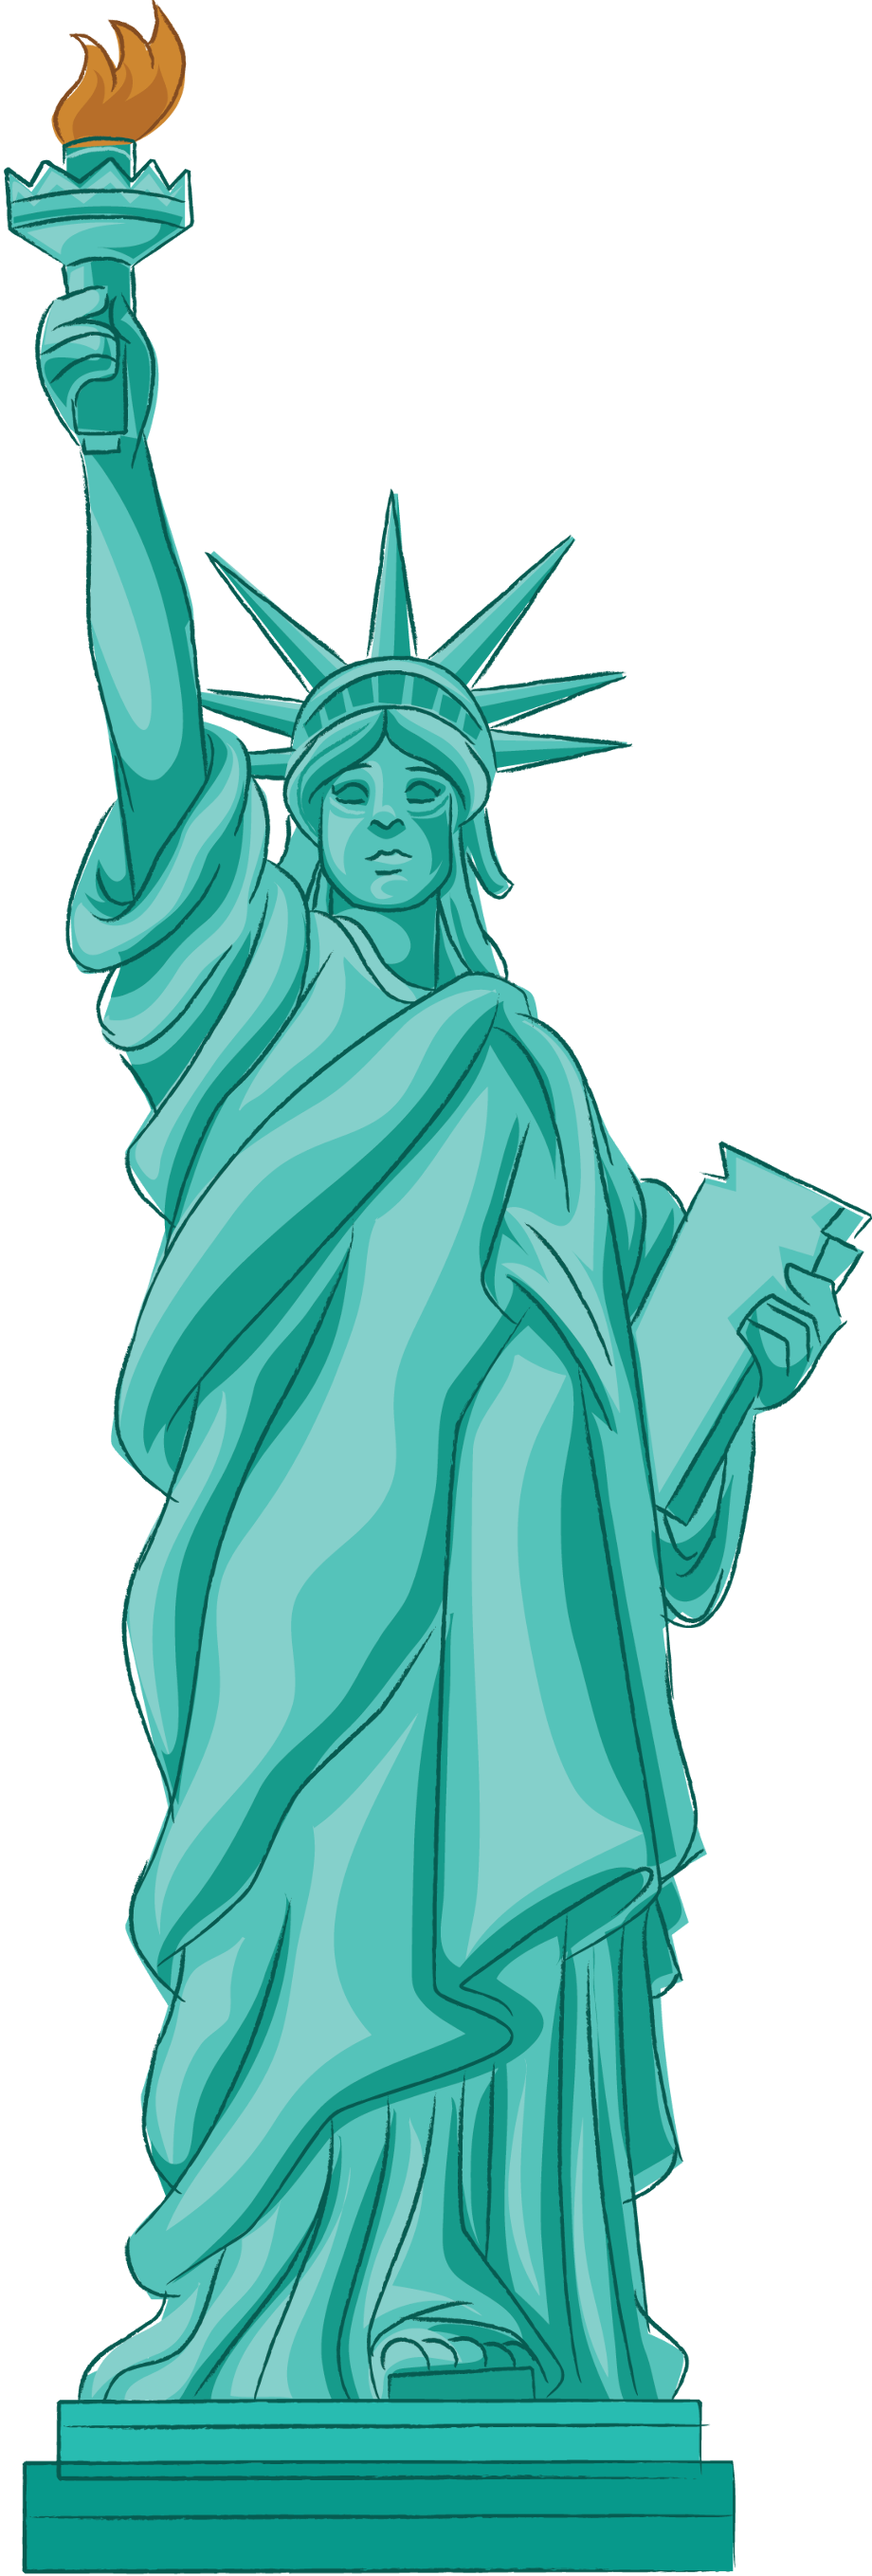 Download High Quality statue of liberty clipart graphic Transparent PNG